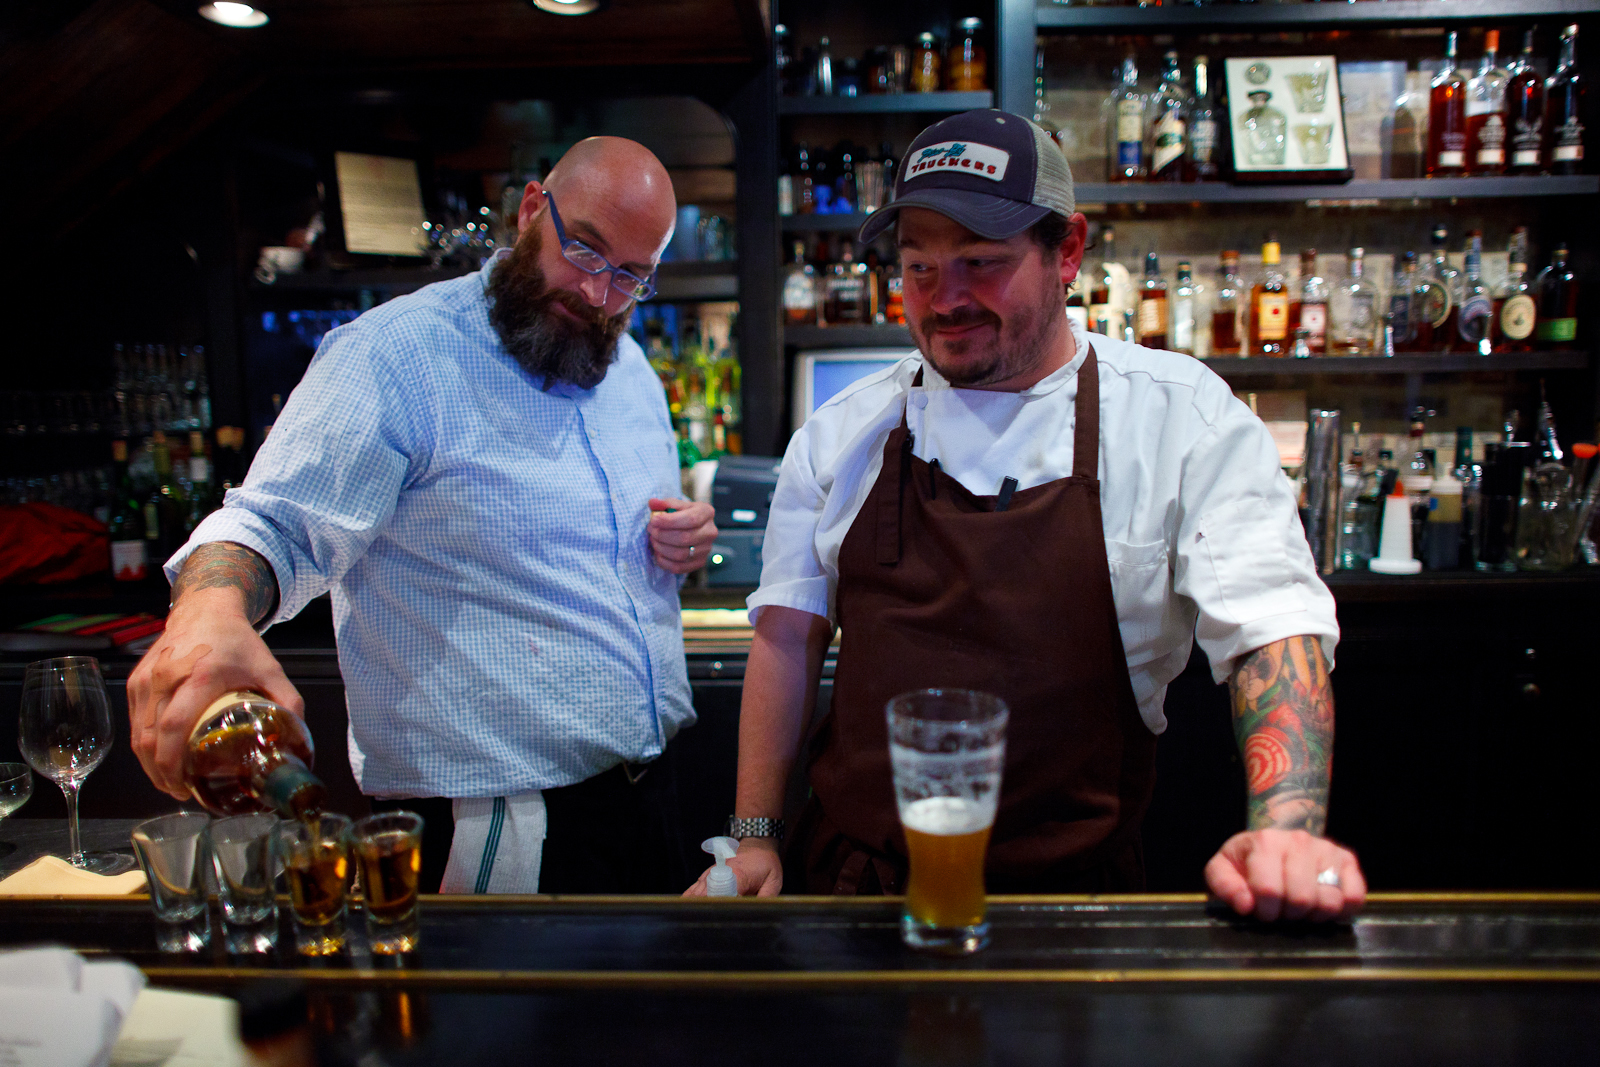 A bourbon tour, led by Chef Sean Brock and Roderick Hale Weaver